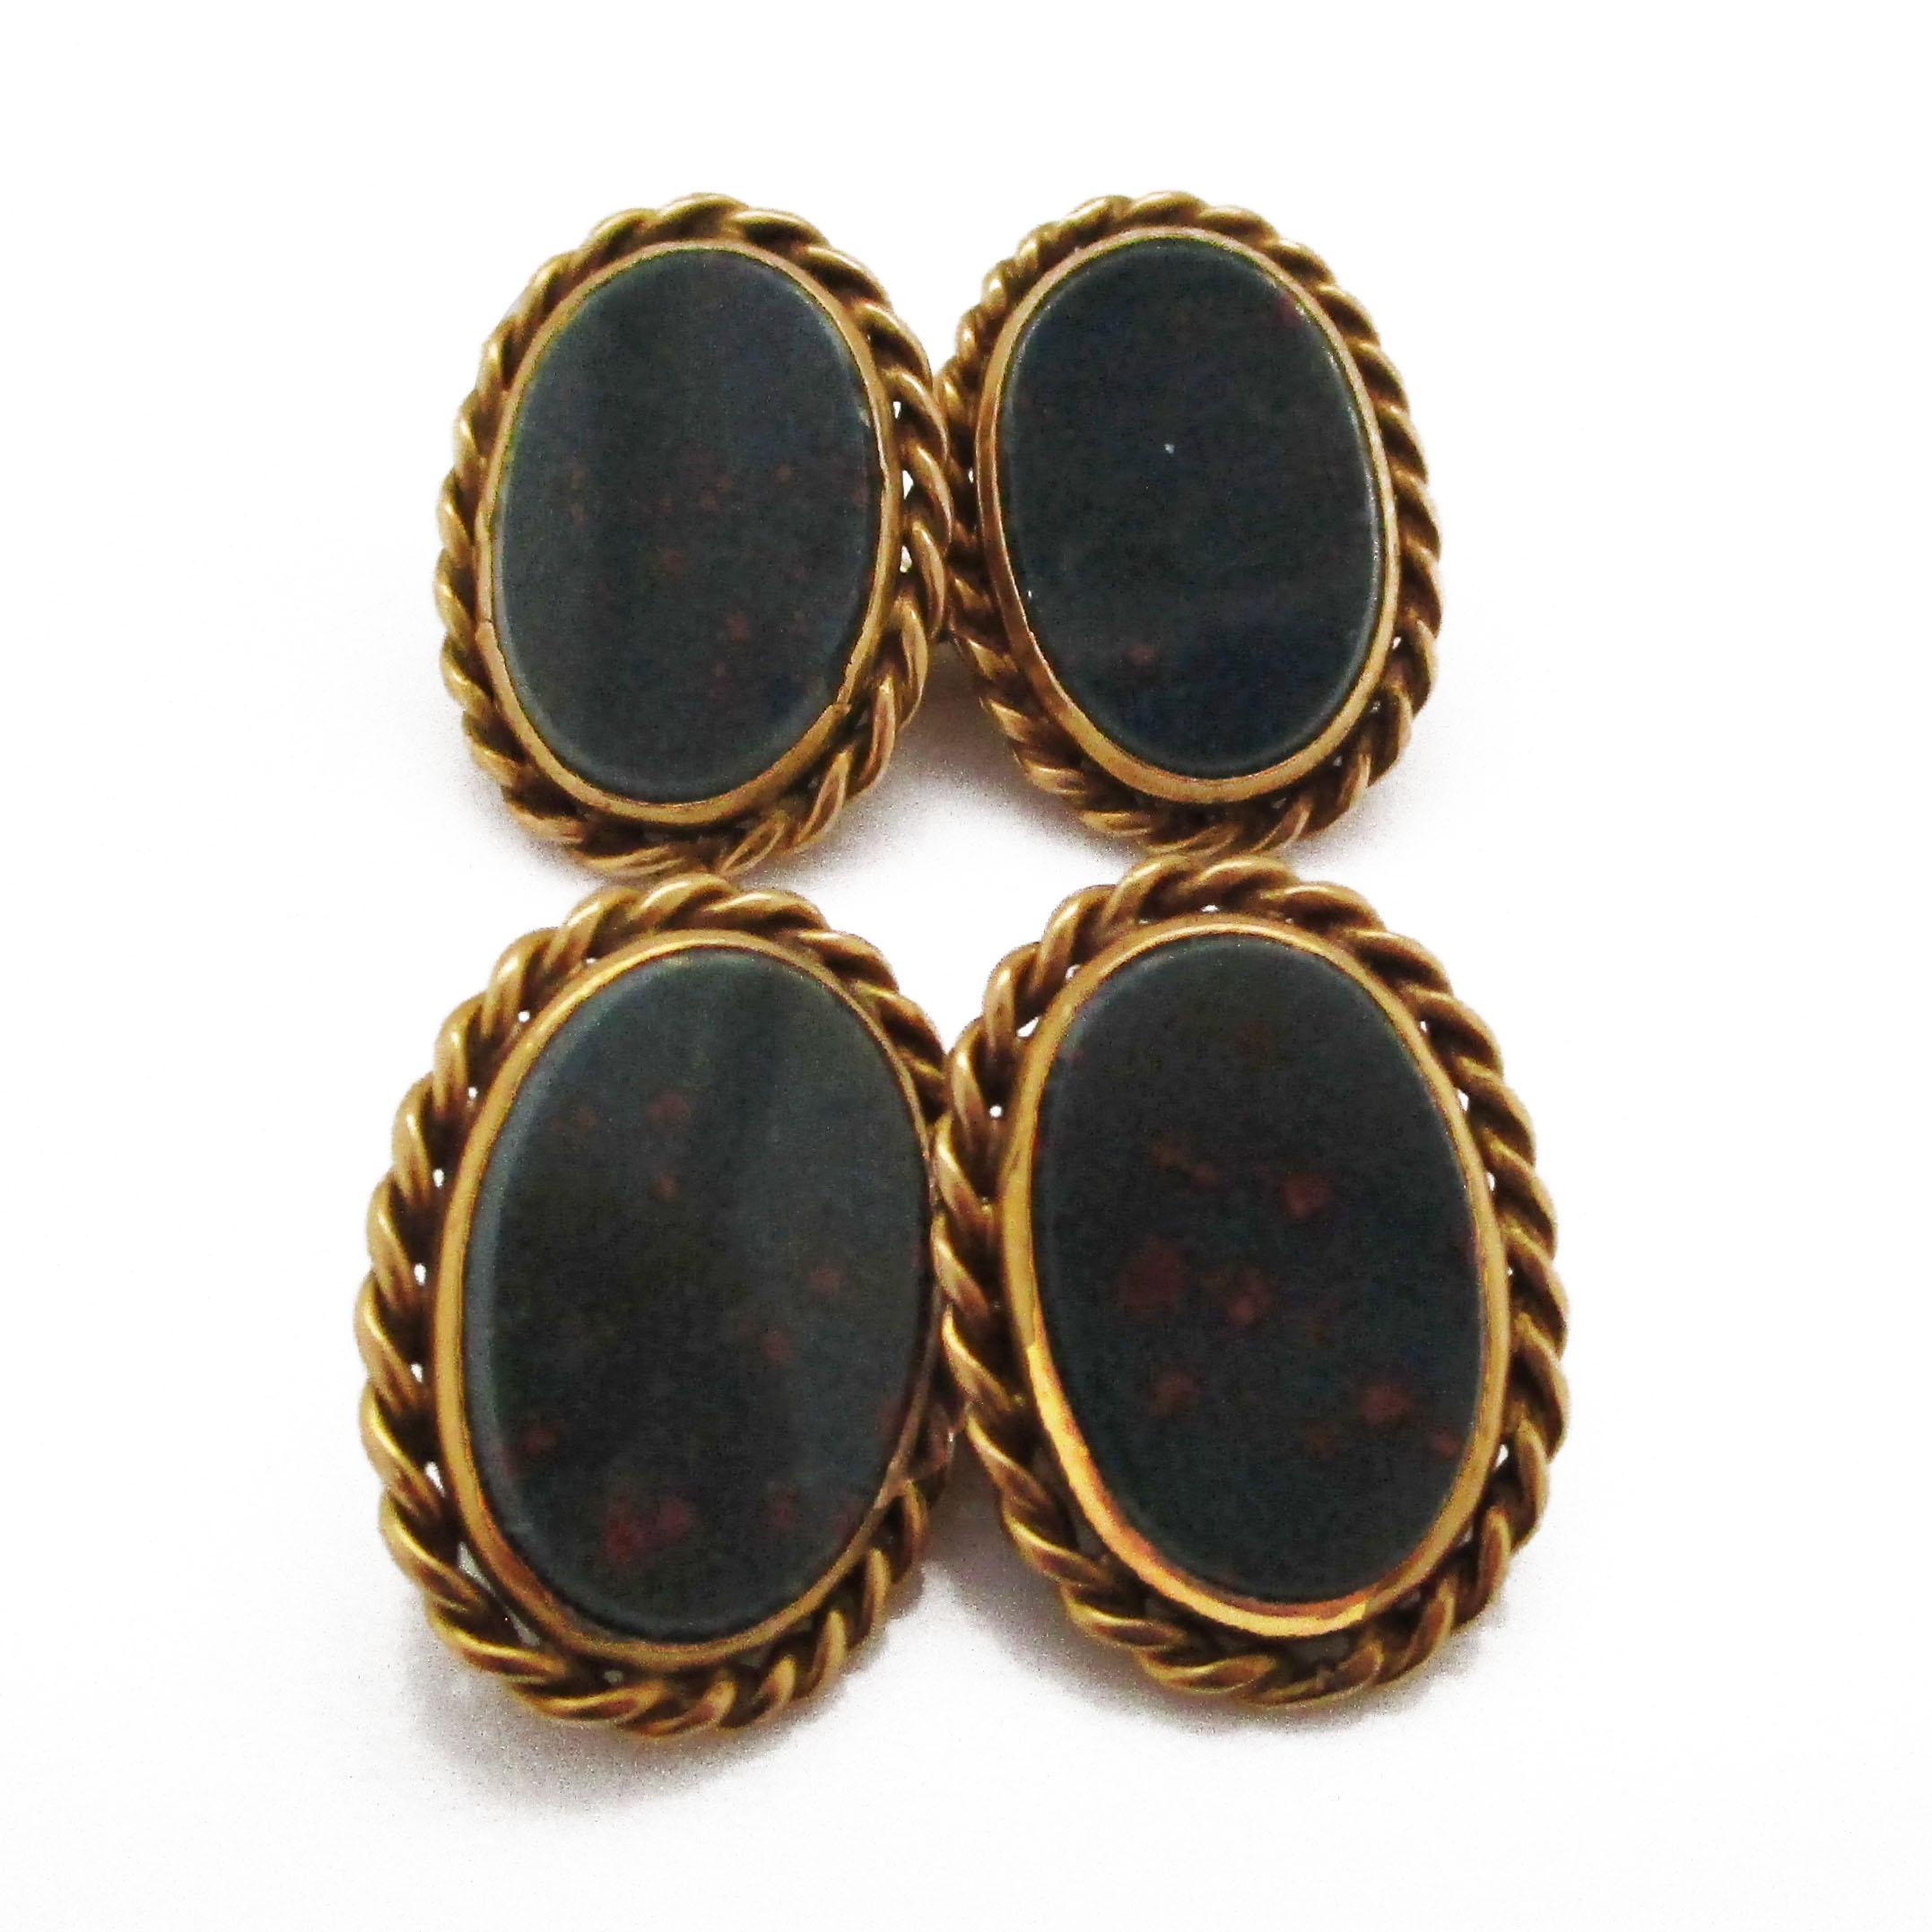 These awesome cufflinks feature rich 18k yellow gold and the subtle depths of green hued bloodstone in a tour de force Victorian fashion. The links have a classic oval shape that makes them sleek, easy to wear, and easy to put on. The panels are